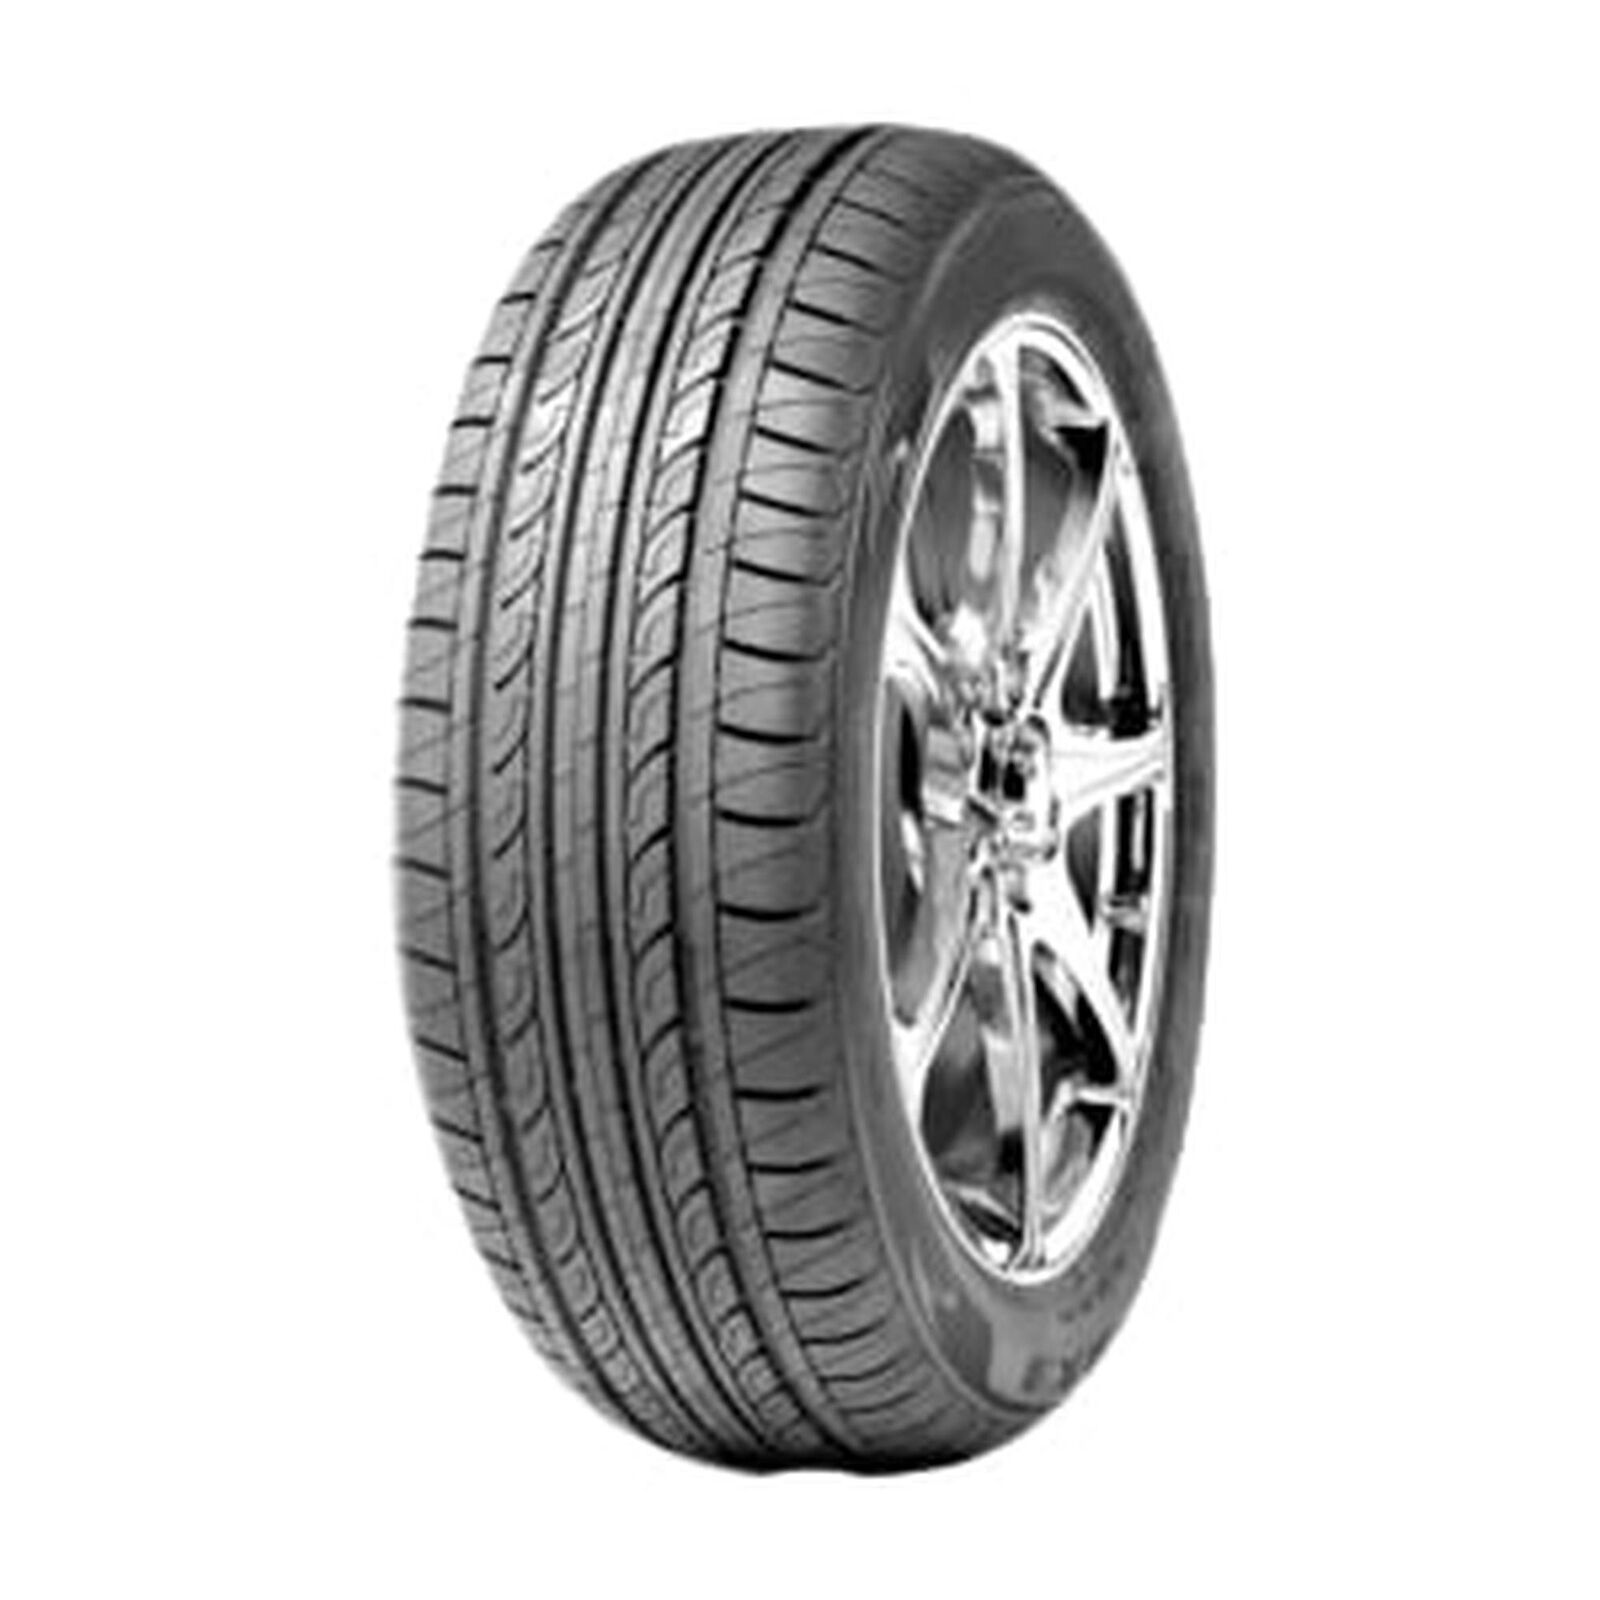 4 New Ardent Hp Rx3  - 195/50r15 Tires 1955015 195 50 15